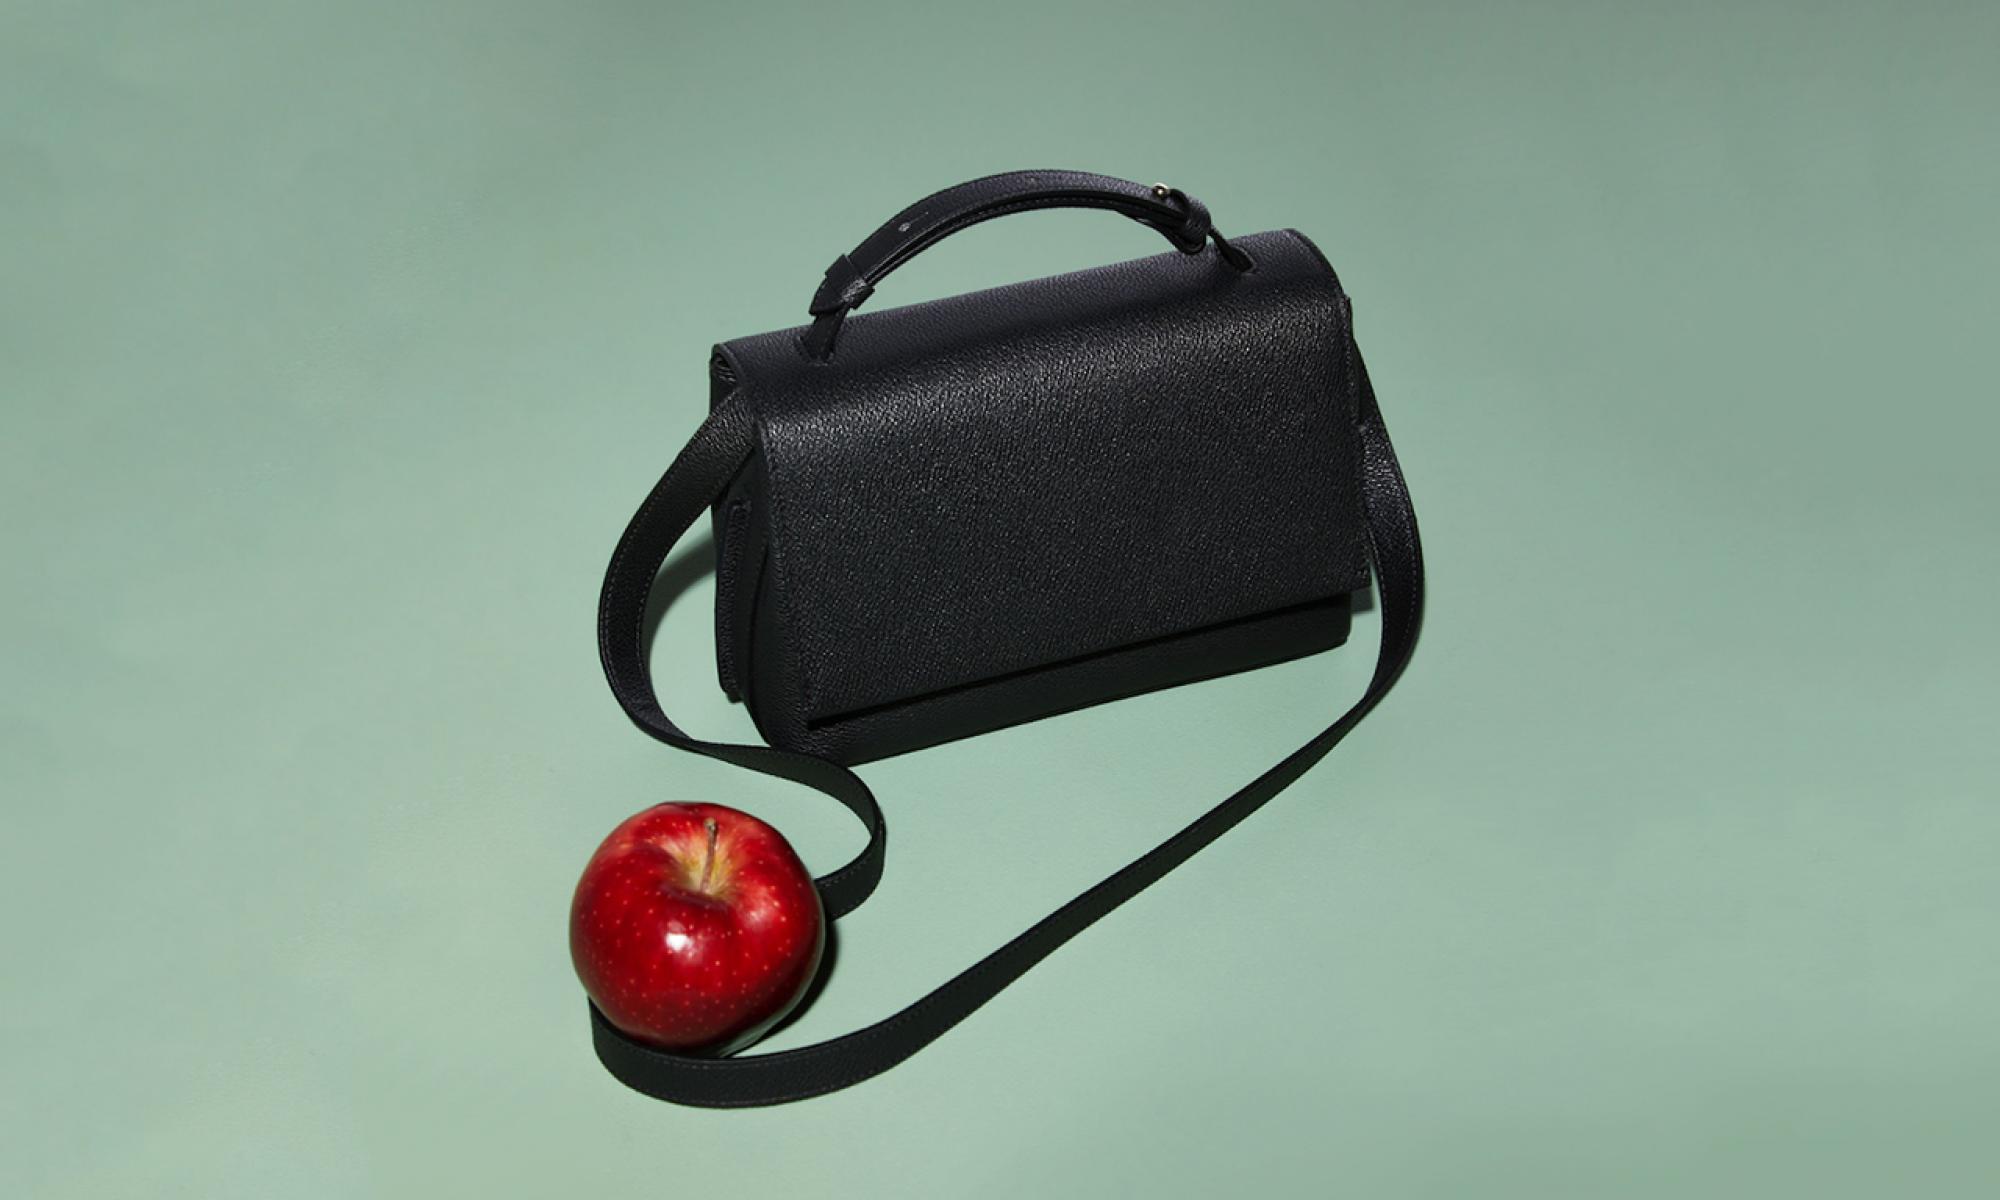 Vegan Luxury Bags - Passion and Awareness For Our World